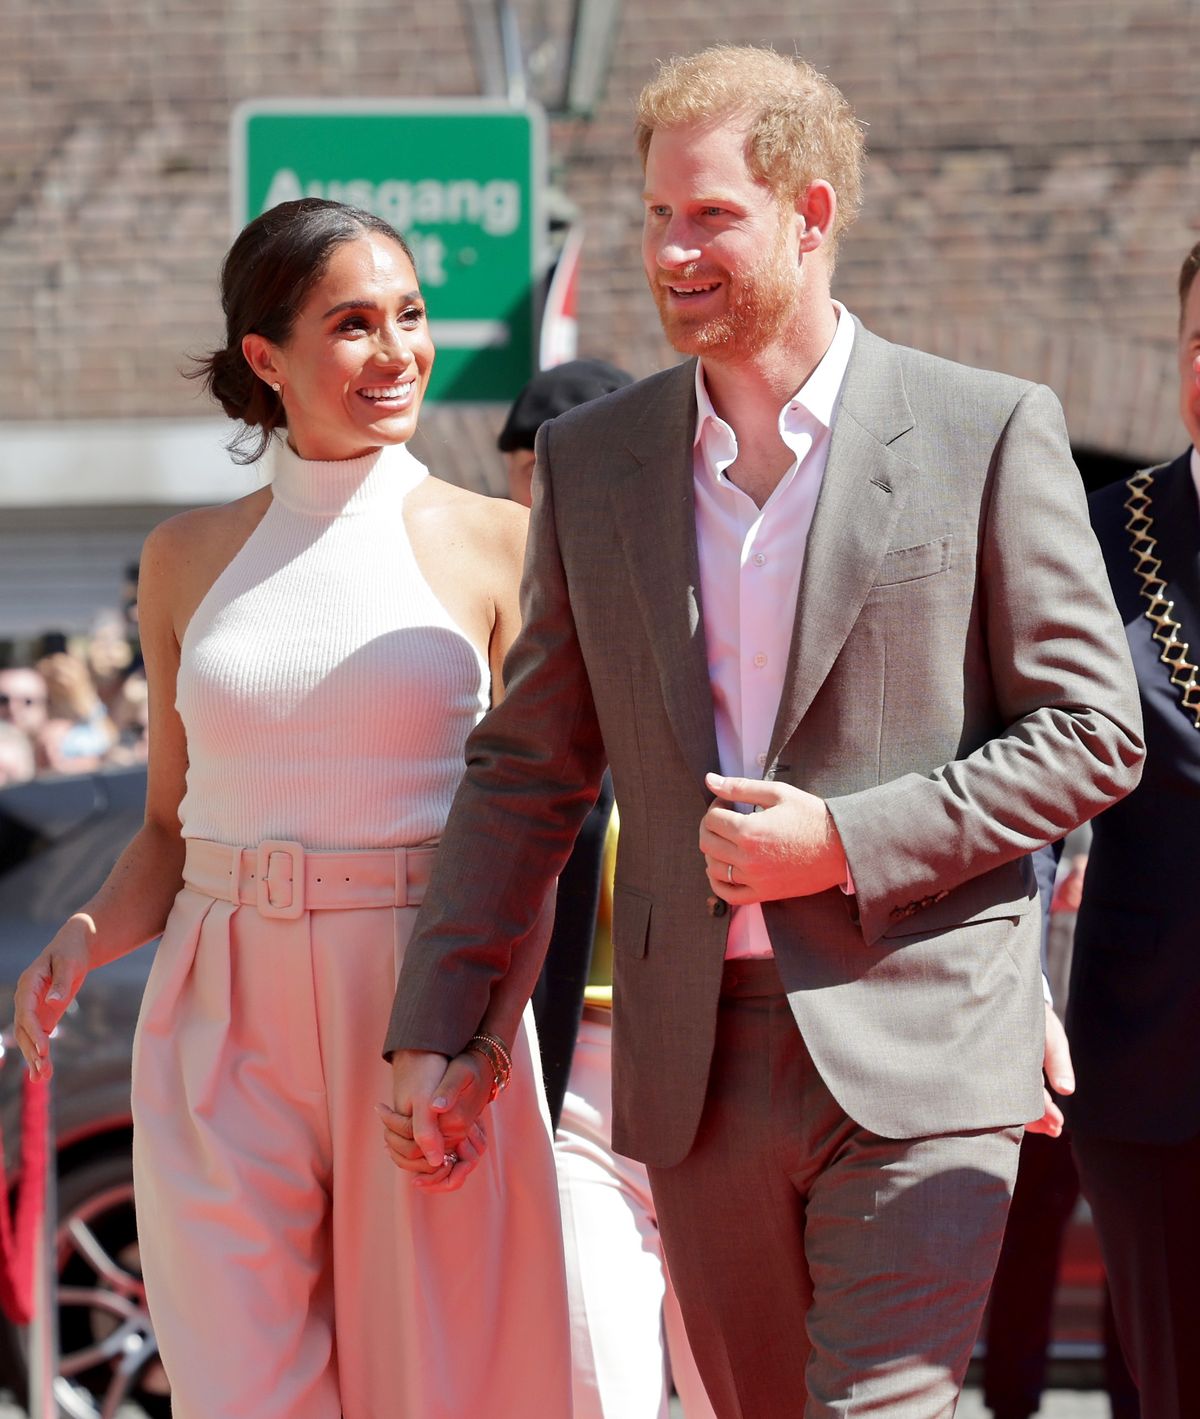 dusseldorf, germany september 06 prince harry, duke of sussex and meghan, duchess of sussex arrive at the town hall during the invictus games dusseldorf 2023 one year to go events, on september 06, 2022 in dusseldorf, germany the invictus games is an international multi sport event first held in 2014, for wounded, injured and sick servicemen and women, both serving and veterans the games were founded by prince harry, duke of sussex whos inspiration came from his visit to the warrior games in the united states, where he witnessed the ability of sport to help both psychologically and physically photo by chris jacksongetty images for invictus games dusseldorf 2023